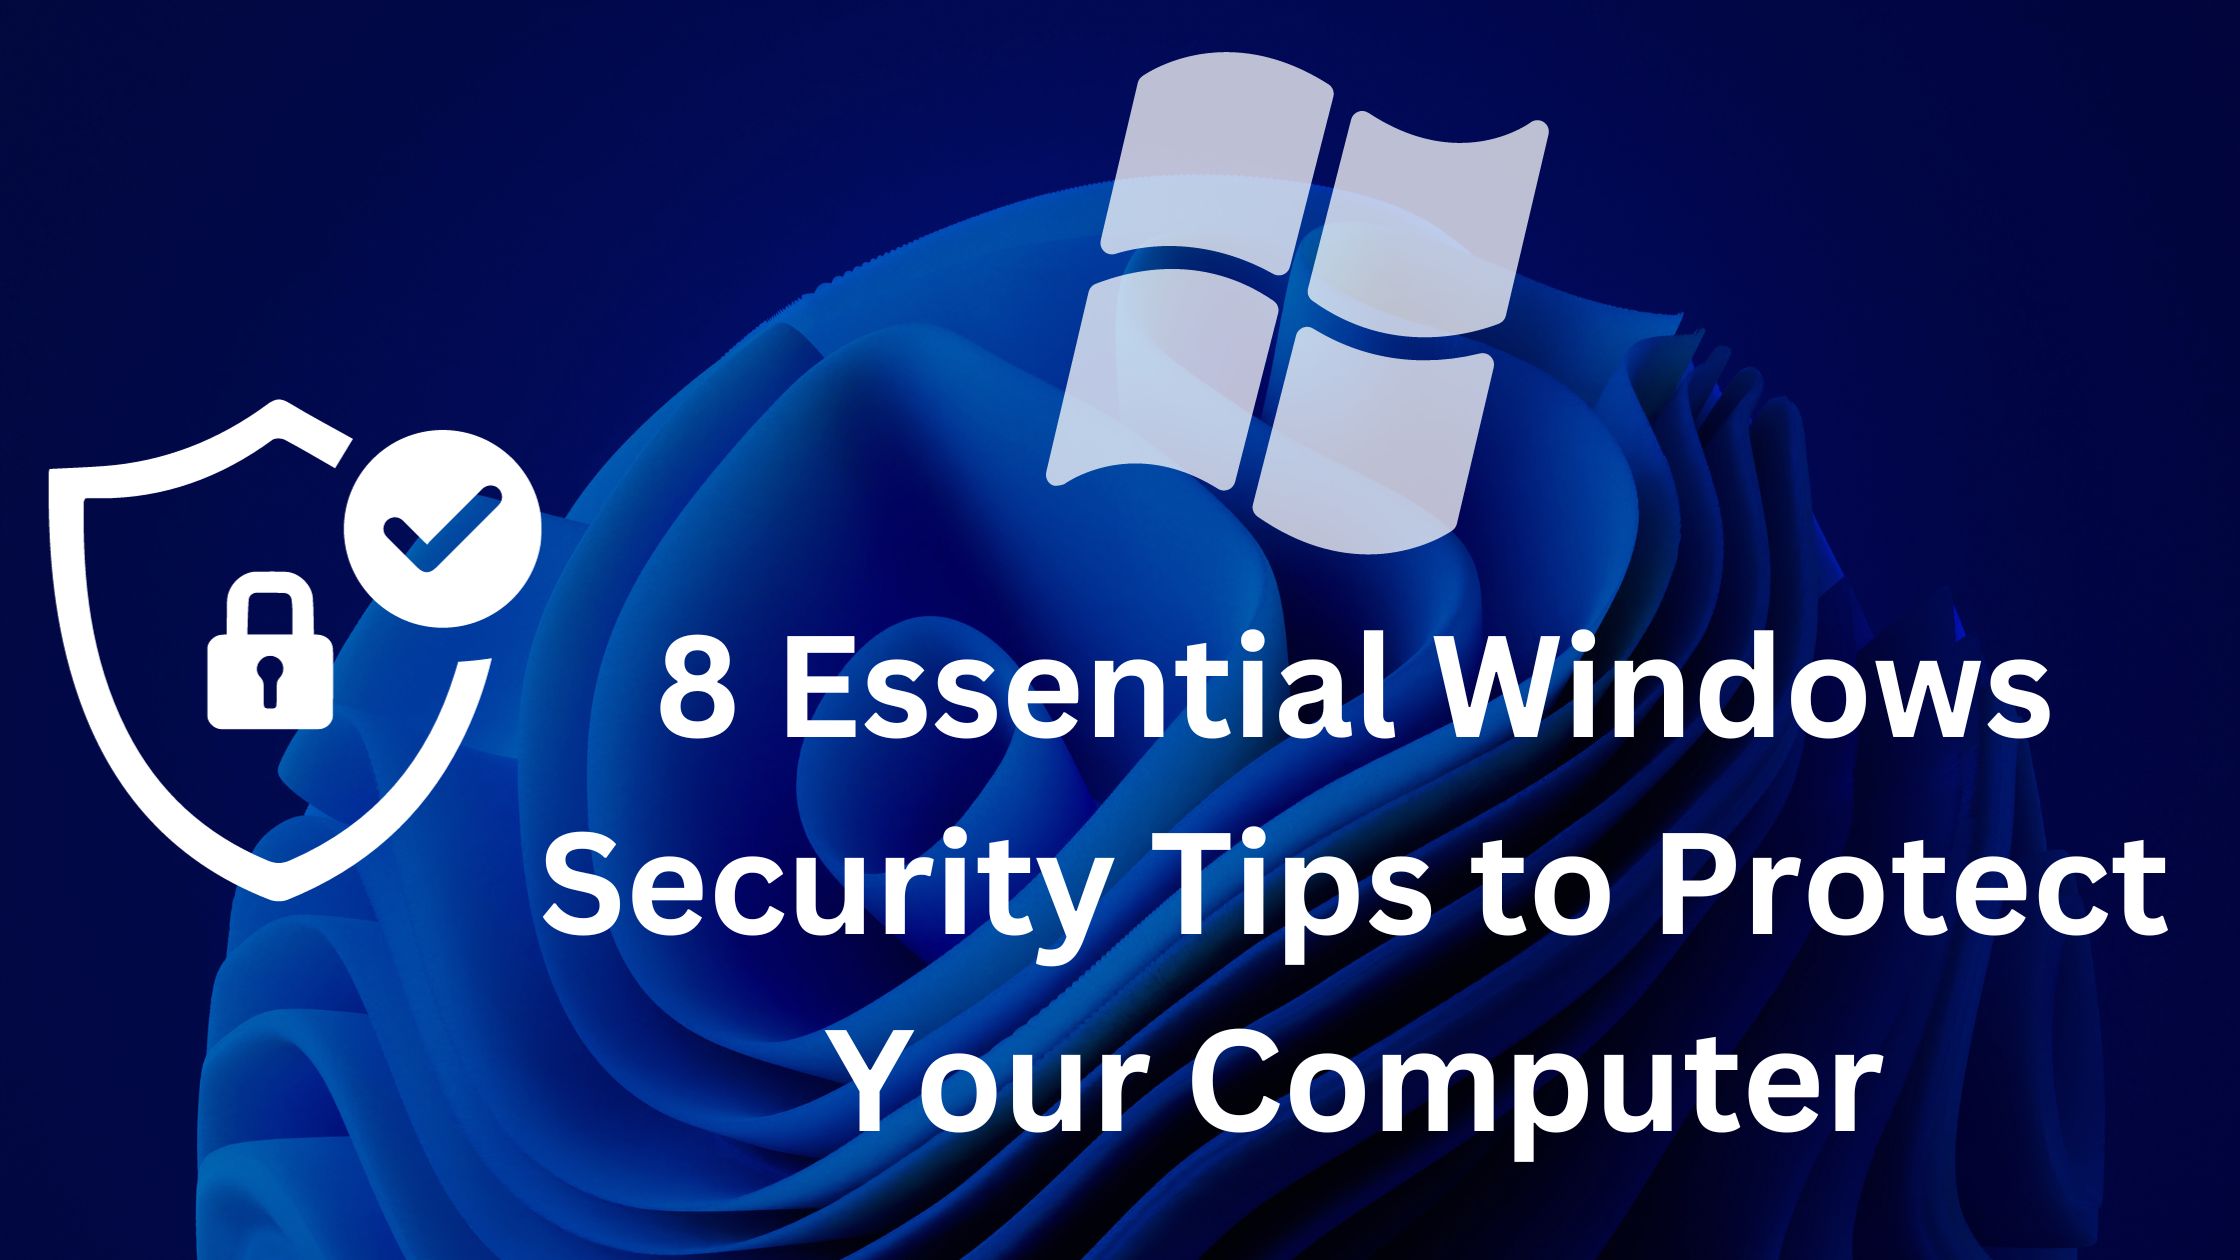 8 Essential Windows Security Tips to Protect Your Computer